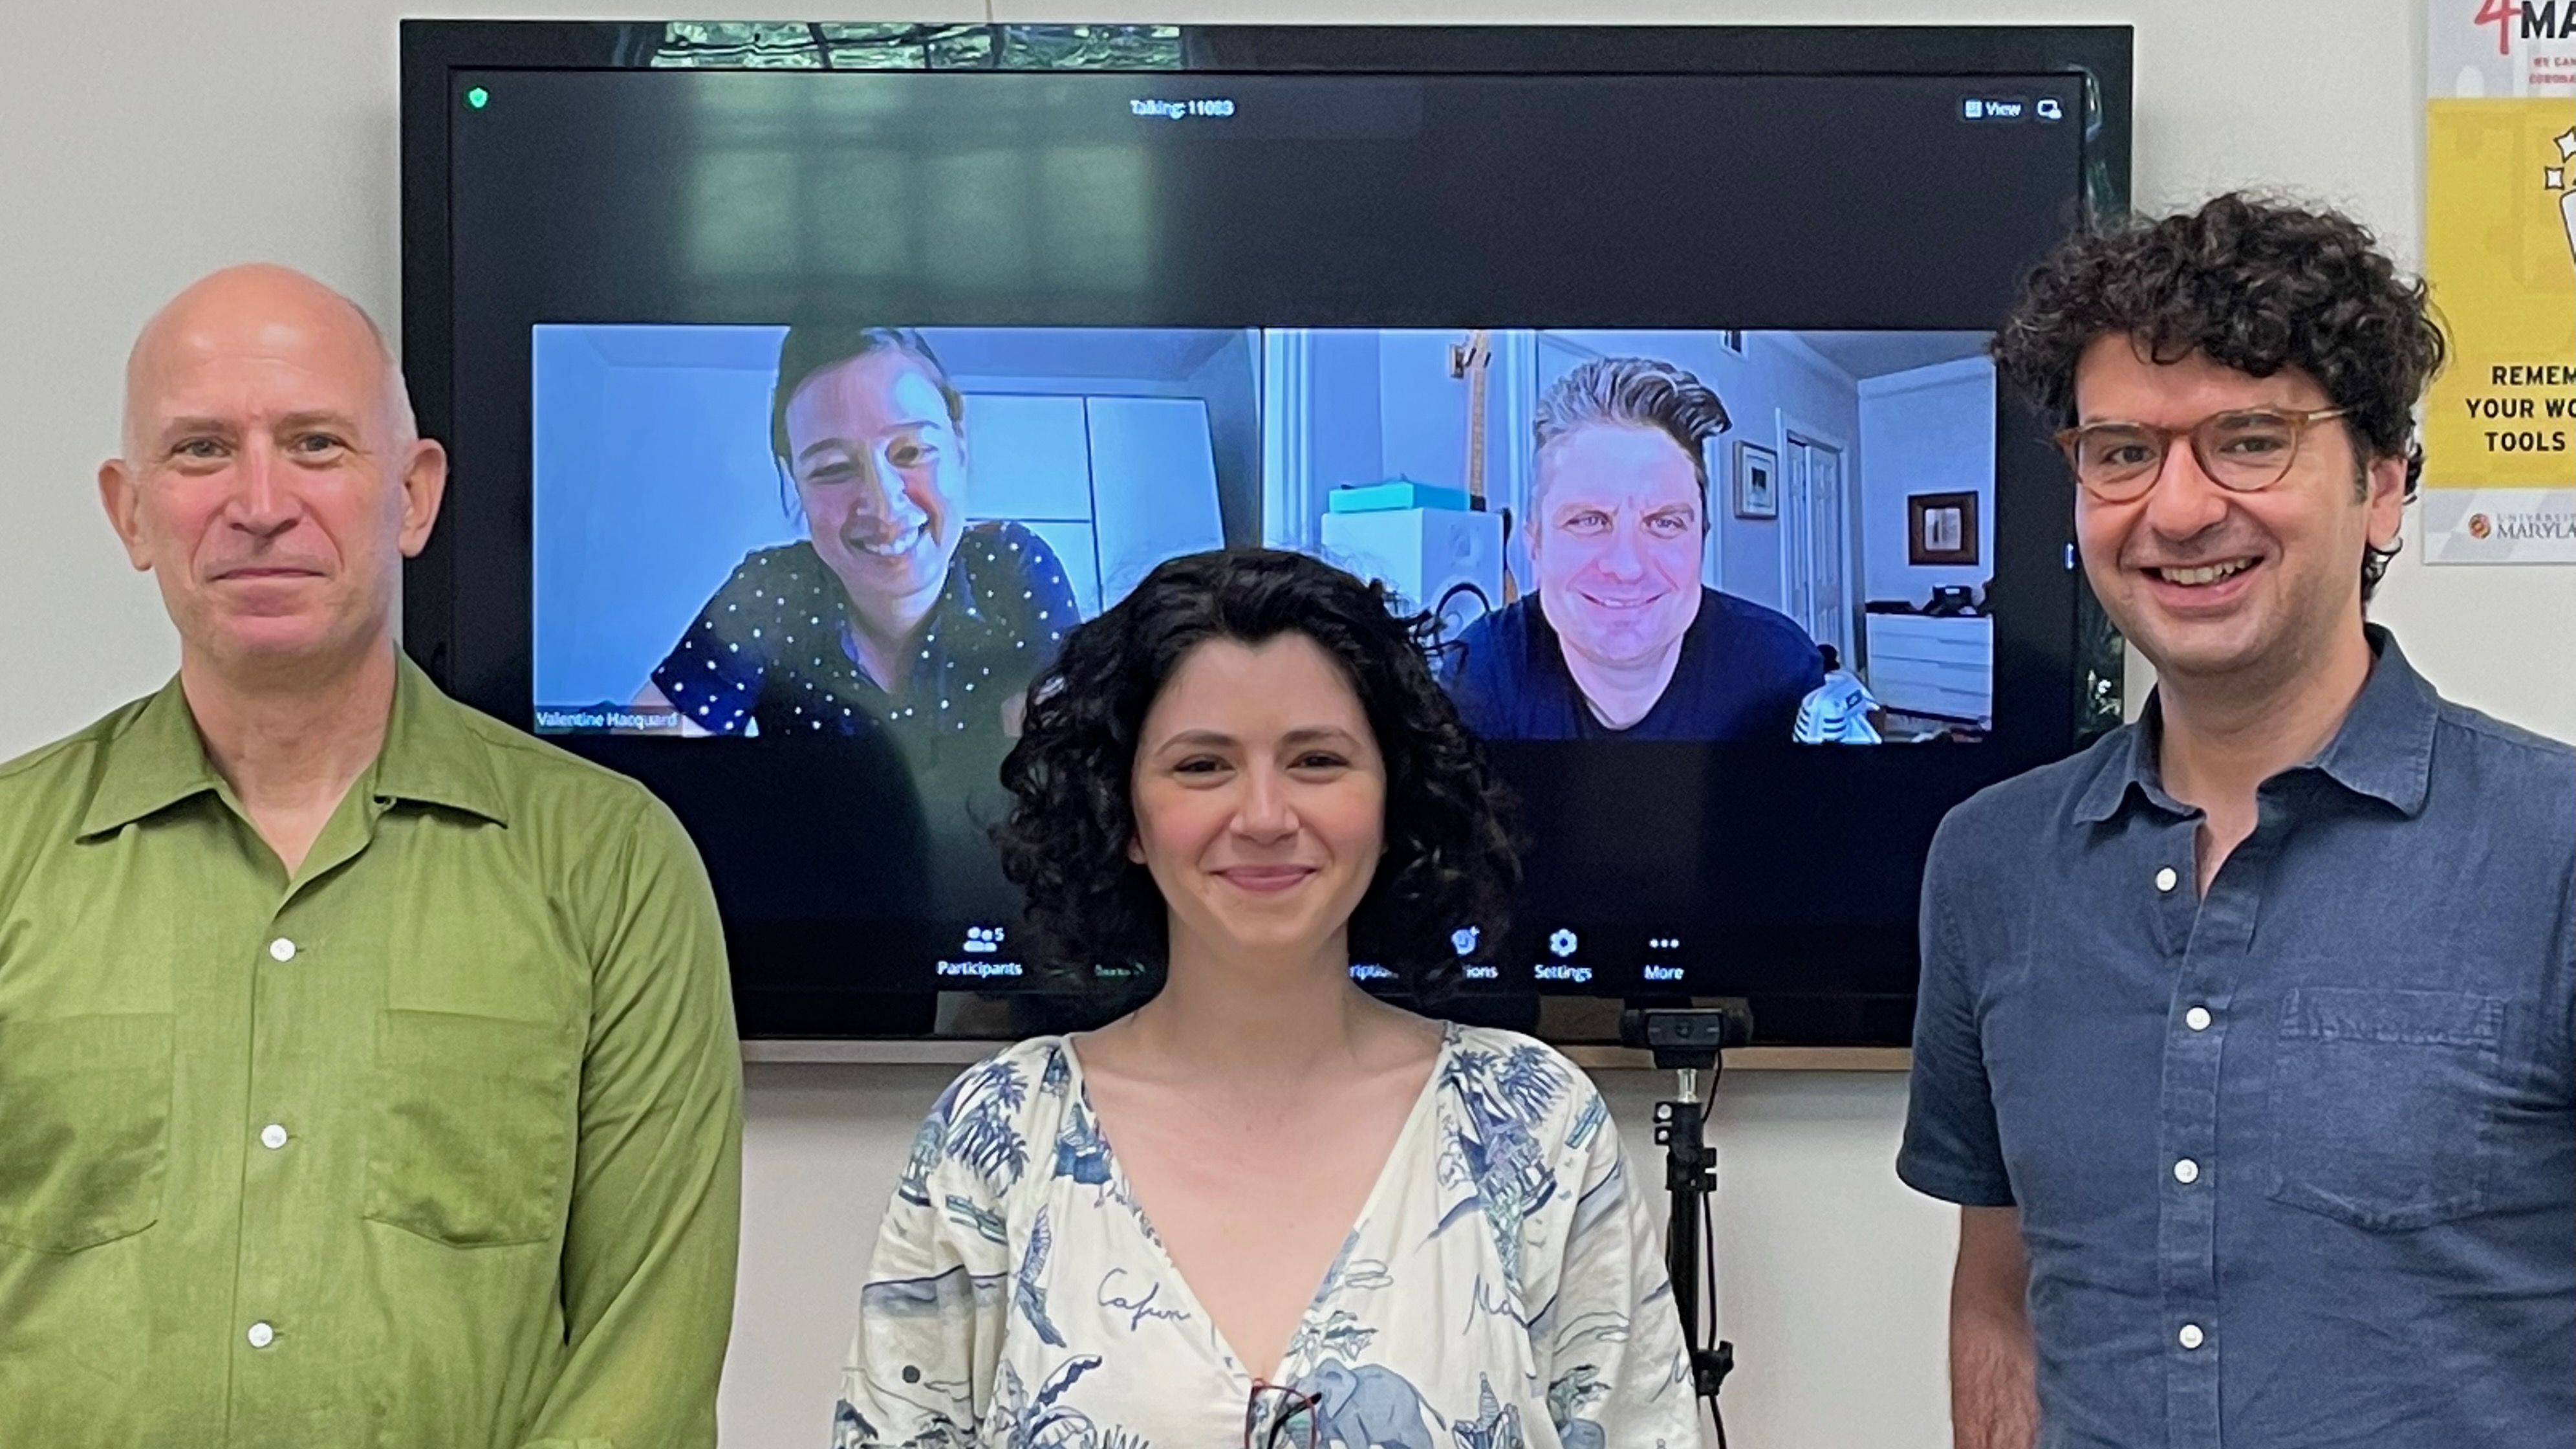 A young woman, smiling after having defended her qualifying paper, flanked by her proud faculty committee members: two men standing on either side, and a man and a woman joining remotely on a large screen behind her.